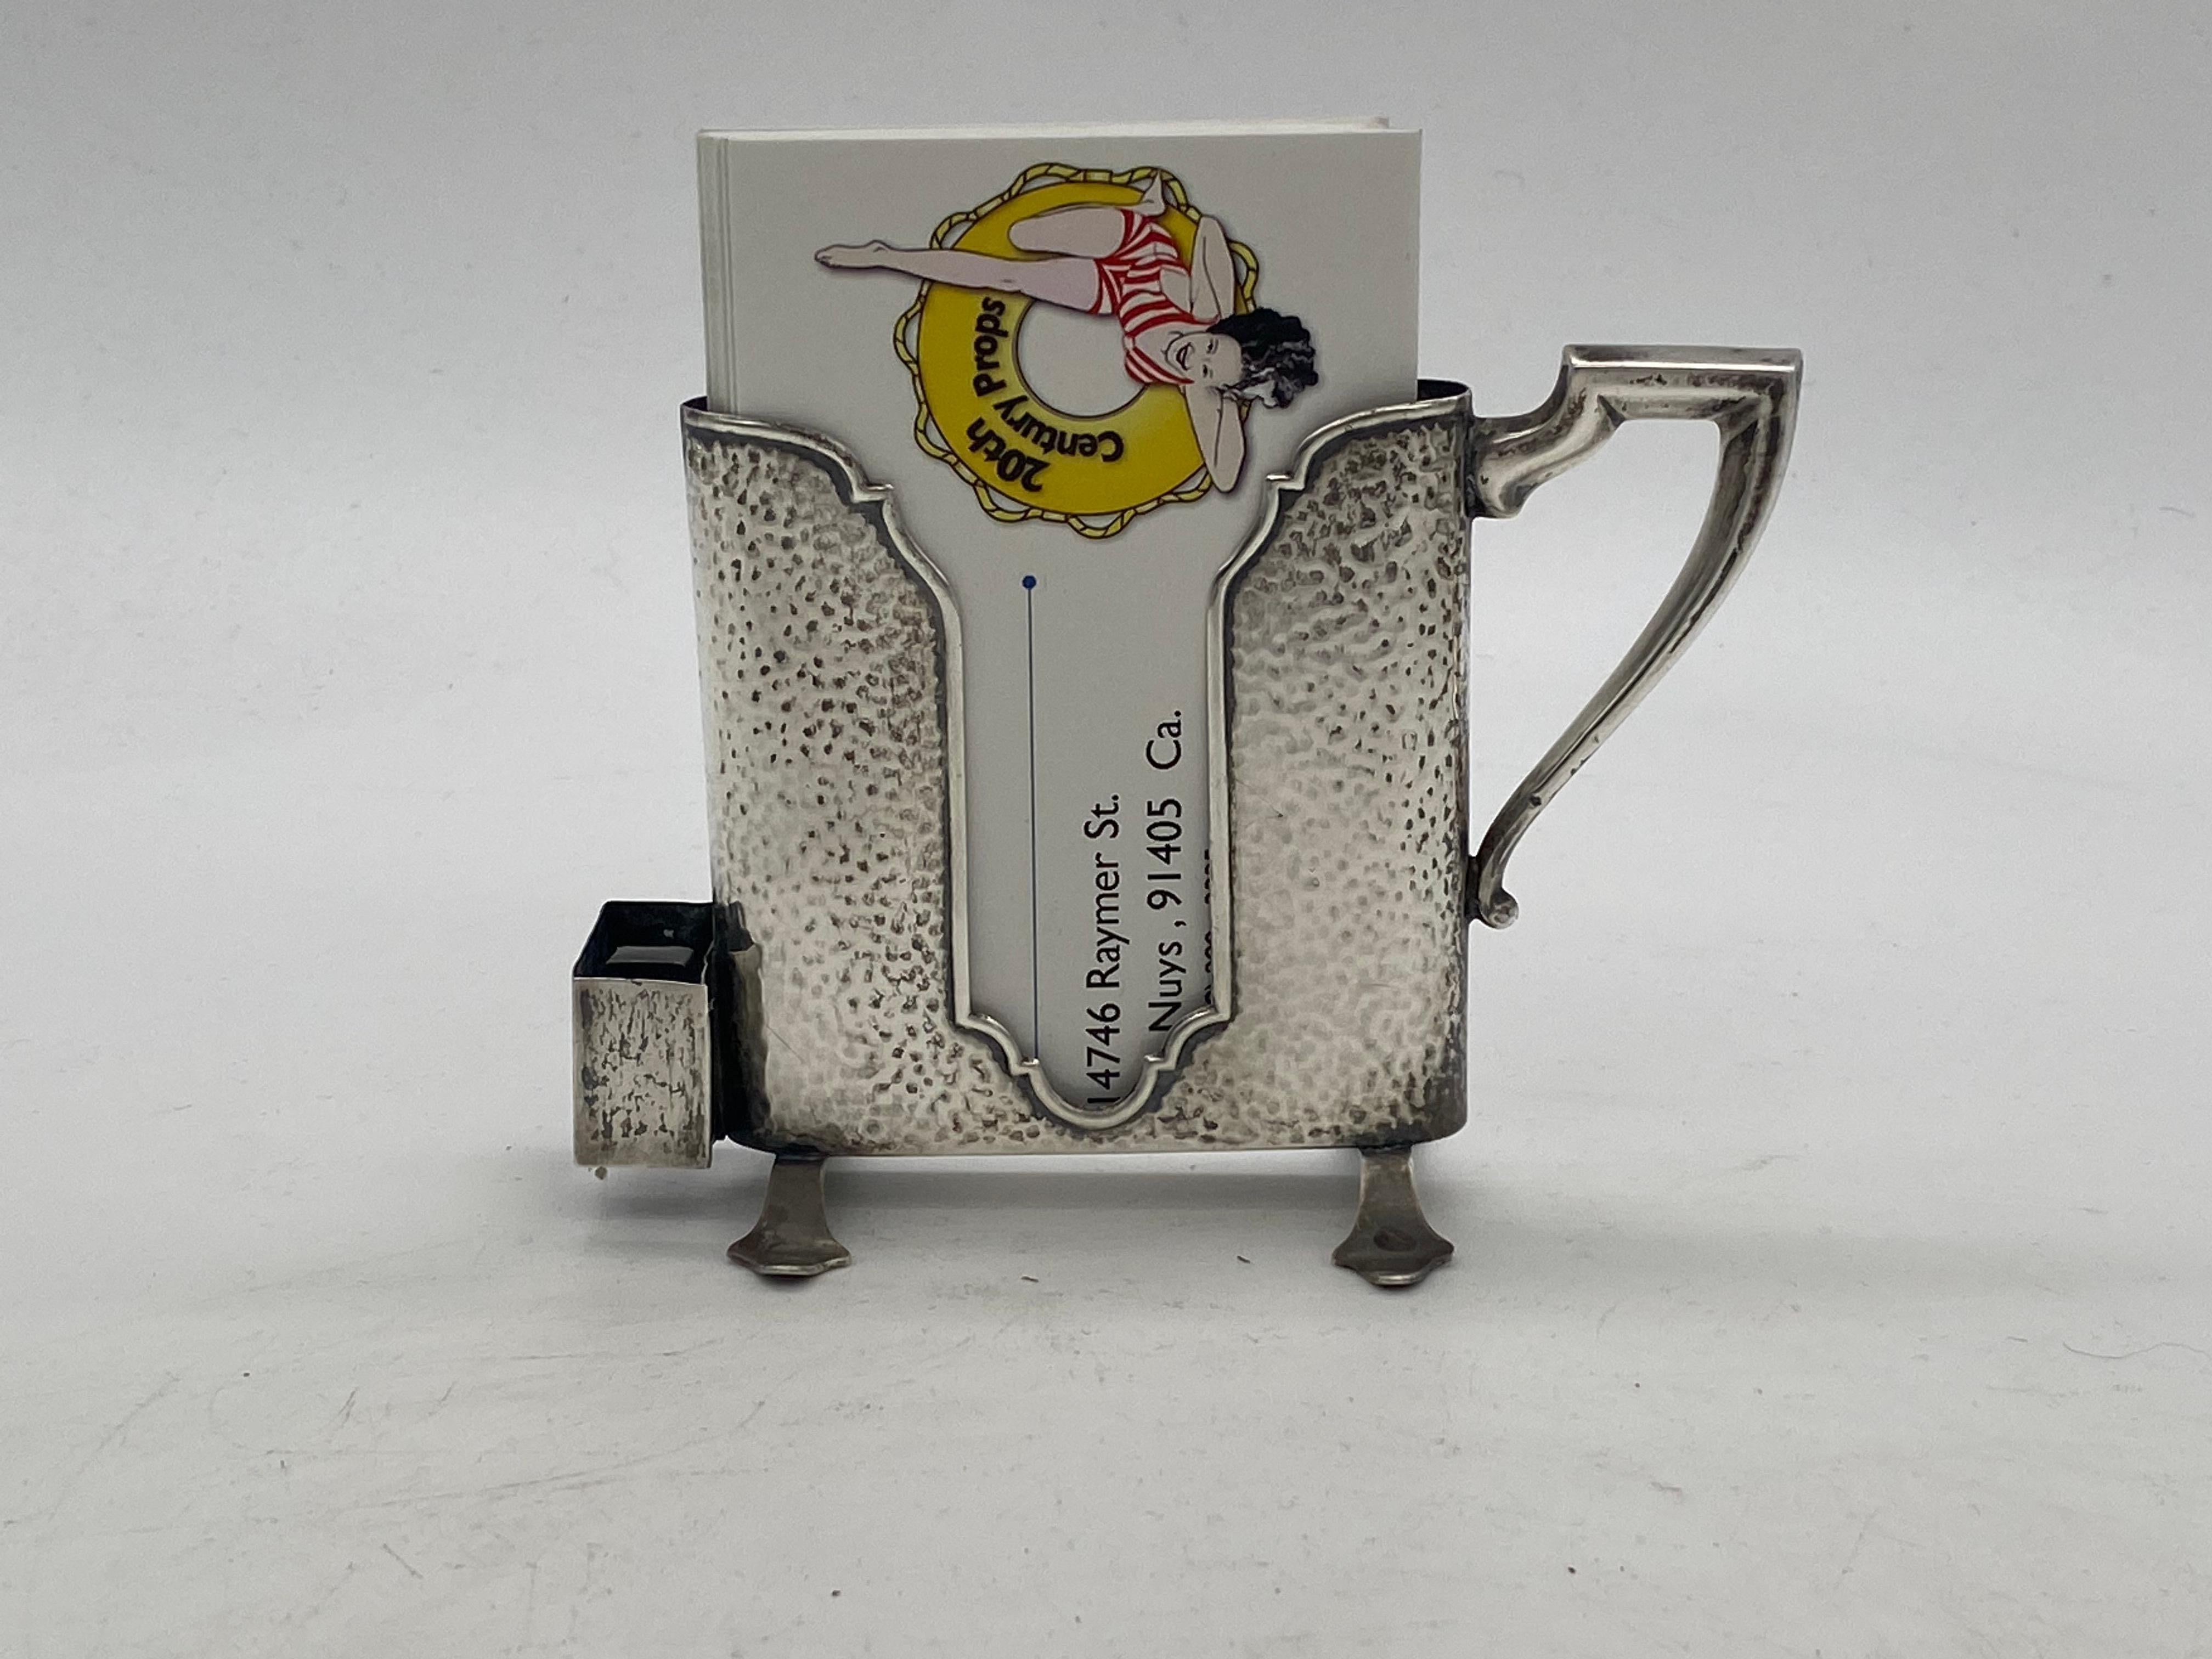 Antique Art Nouveau sterling silver match holder on a stand. It has an Art Deco style holder and a matchbox holder on the left side. This a wonderful addition to a collector of vintage tobacciana or a lover of art deco pieces. Made in the 1920s this